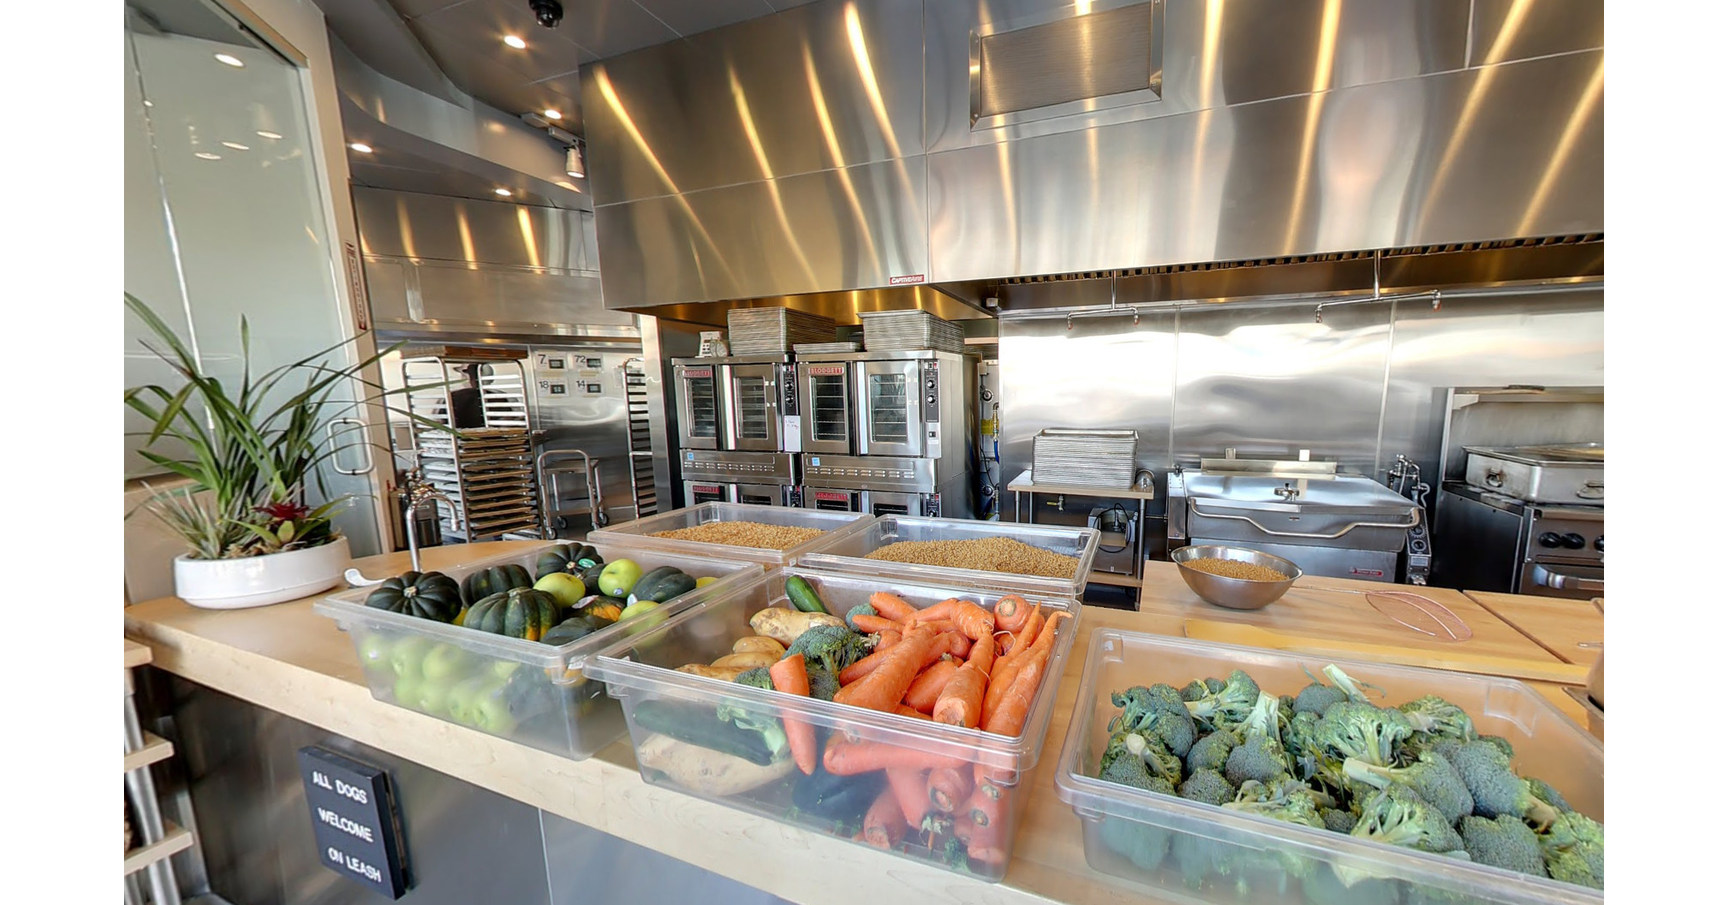 Full-Service Kitchen Opens in Petco - San Diego Business Journal